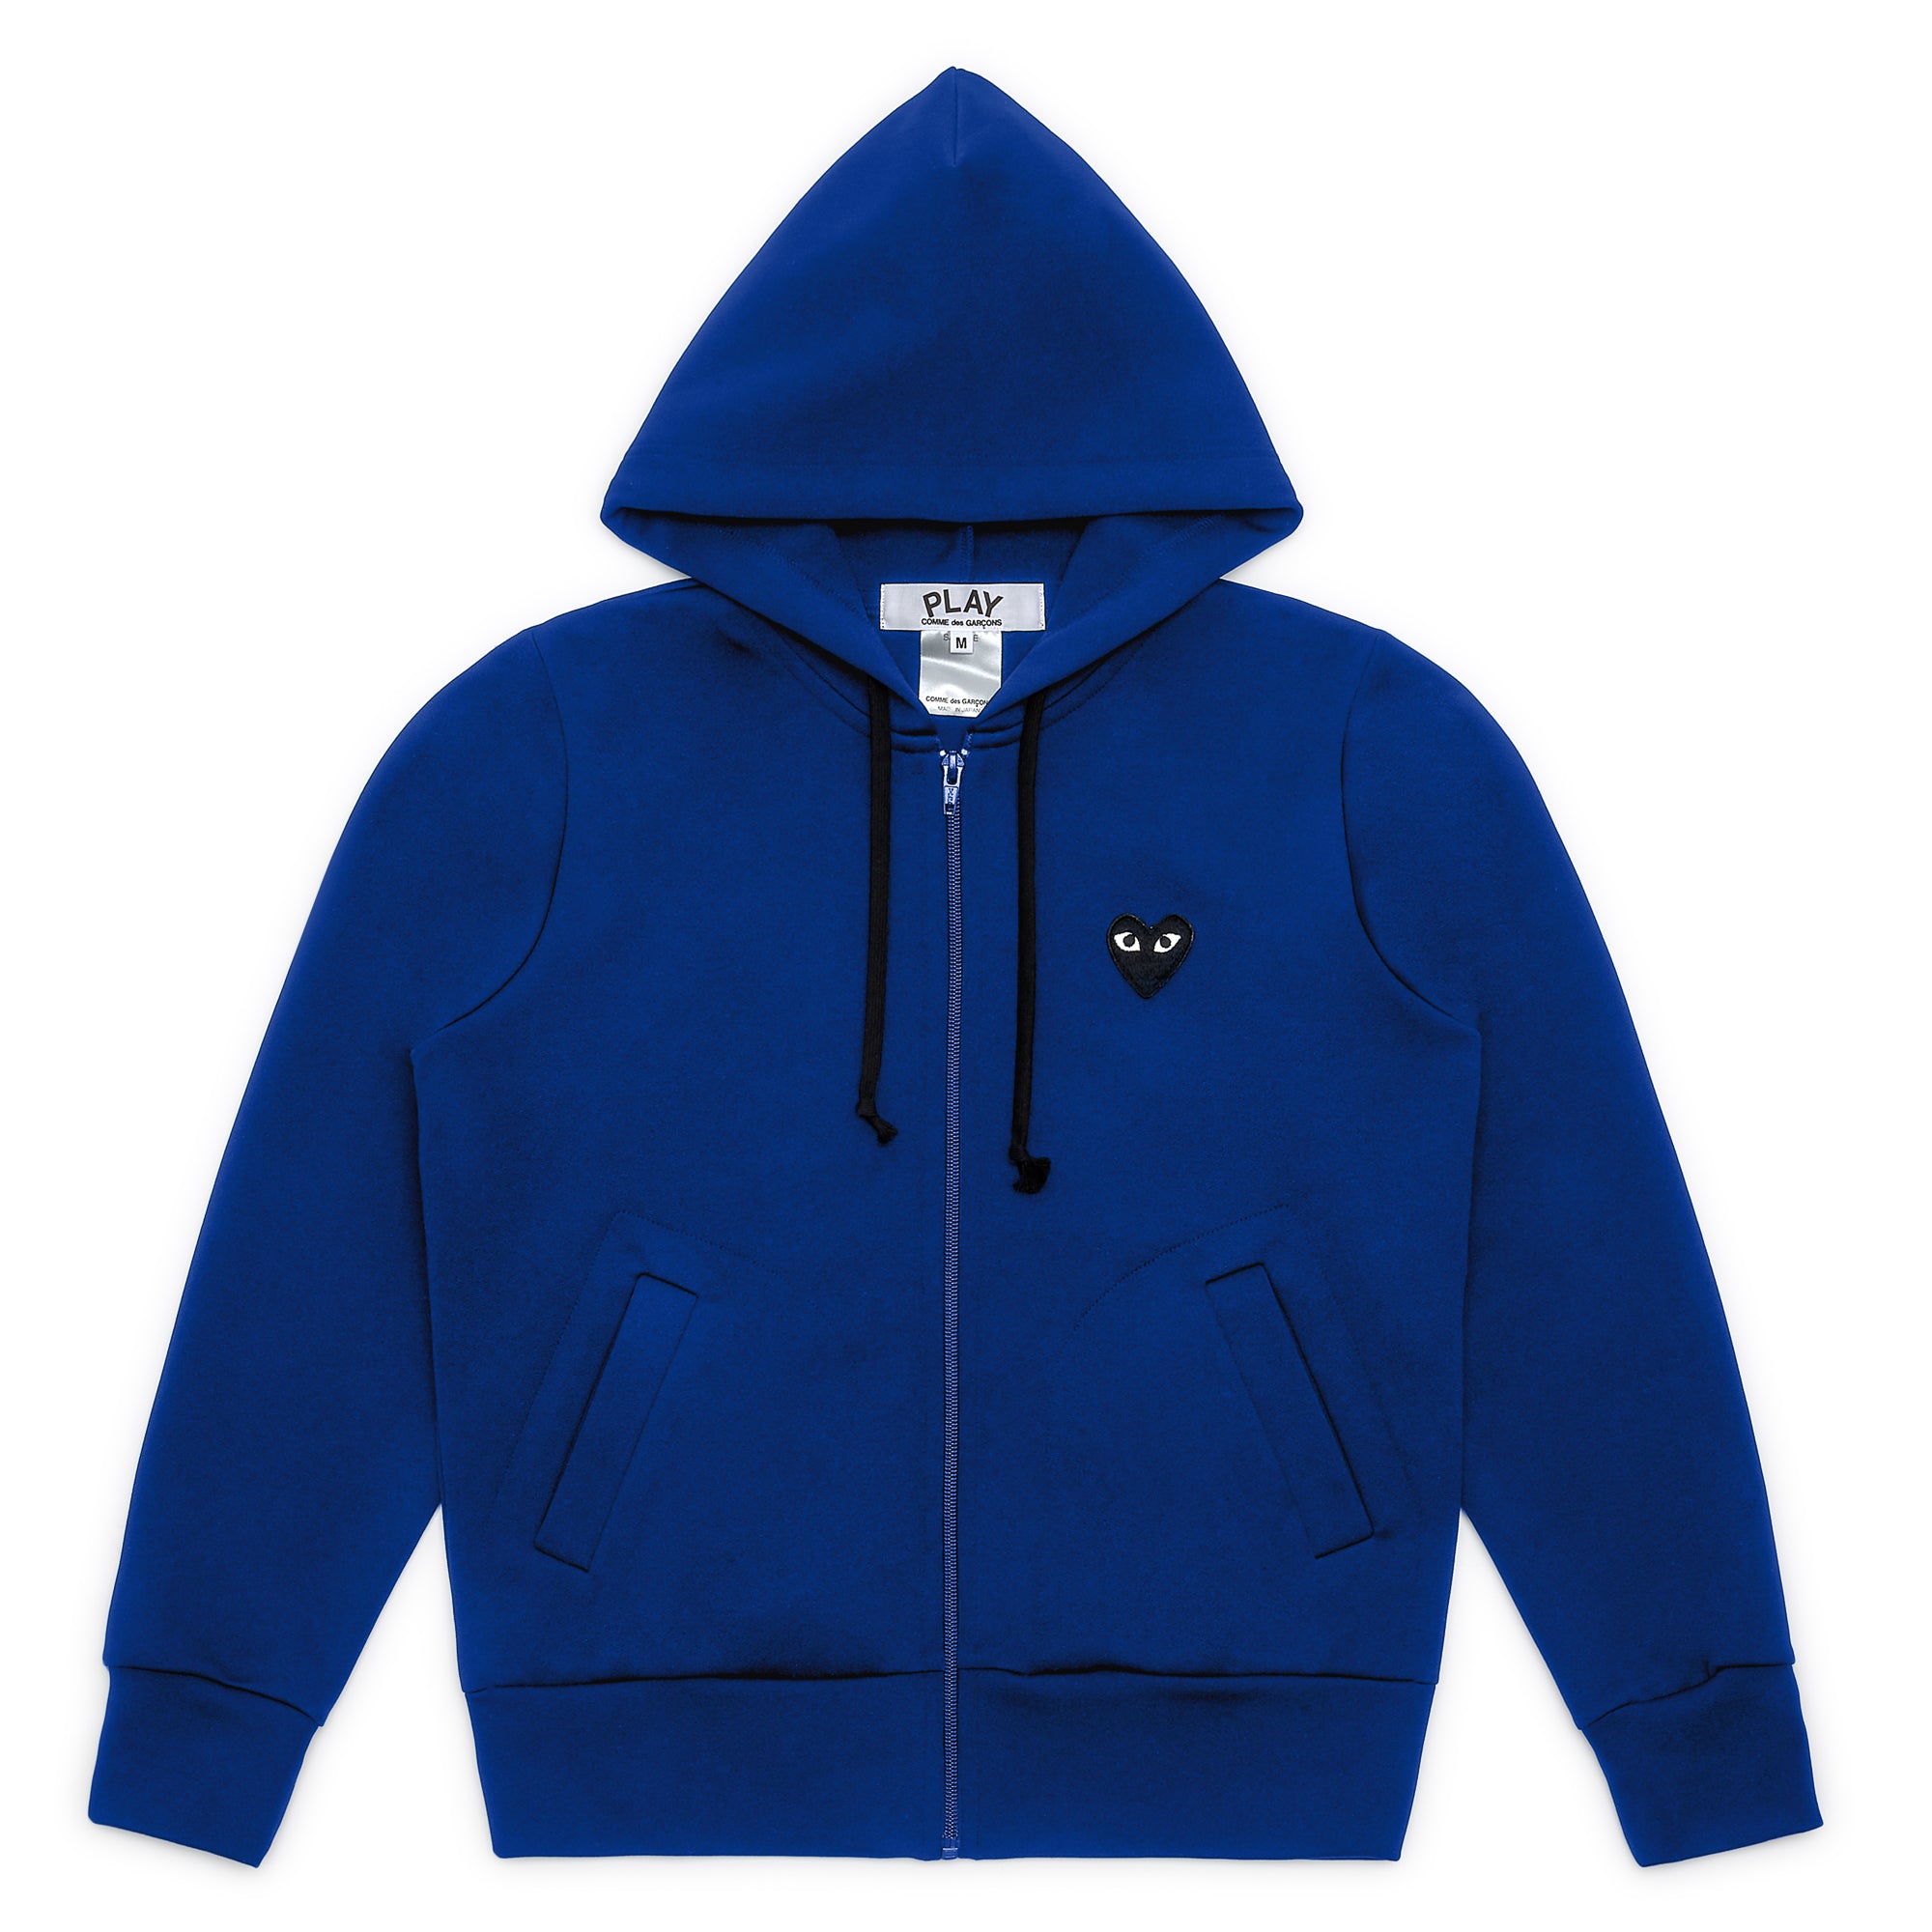 Play Comme des Garçons - Hooded Sweatshirt with Big Hearts - (Navy) view 1